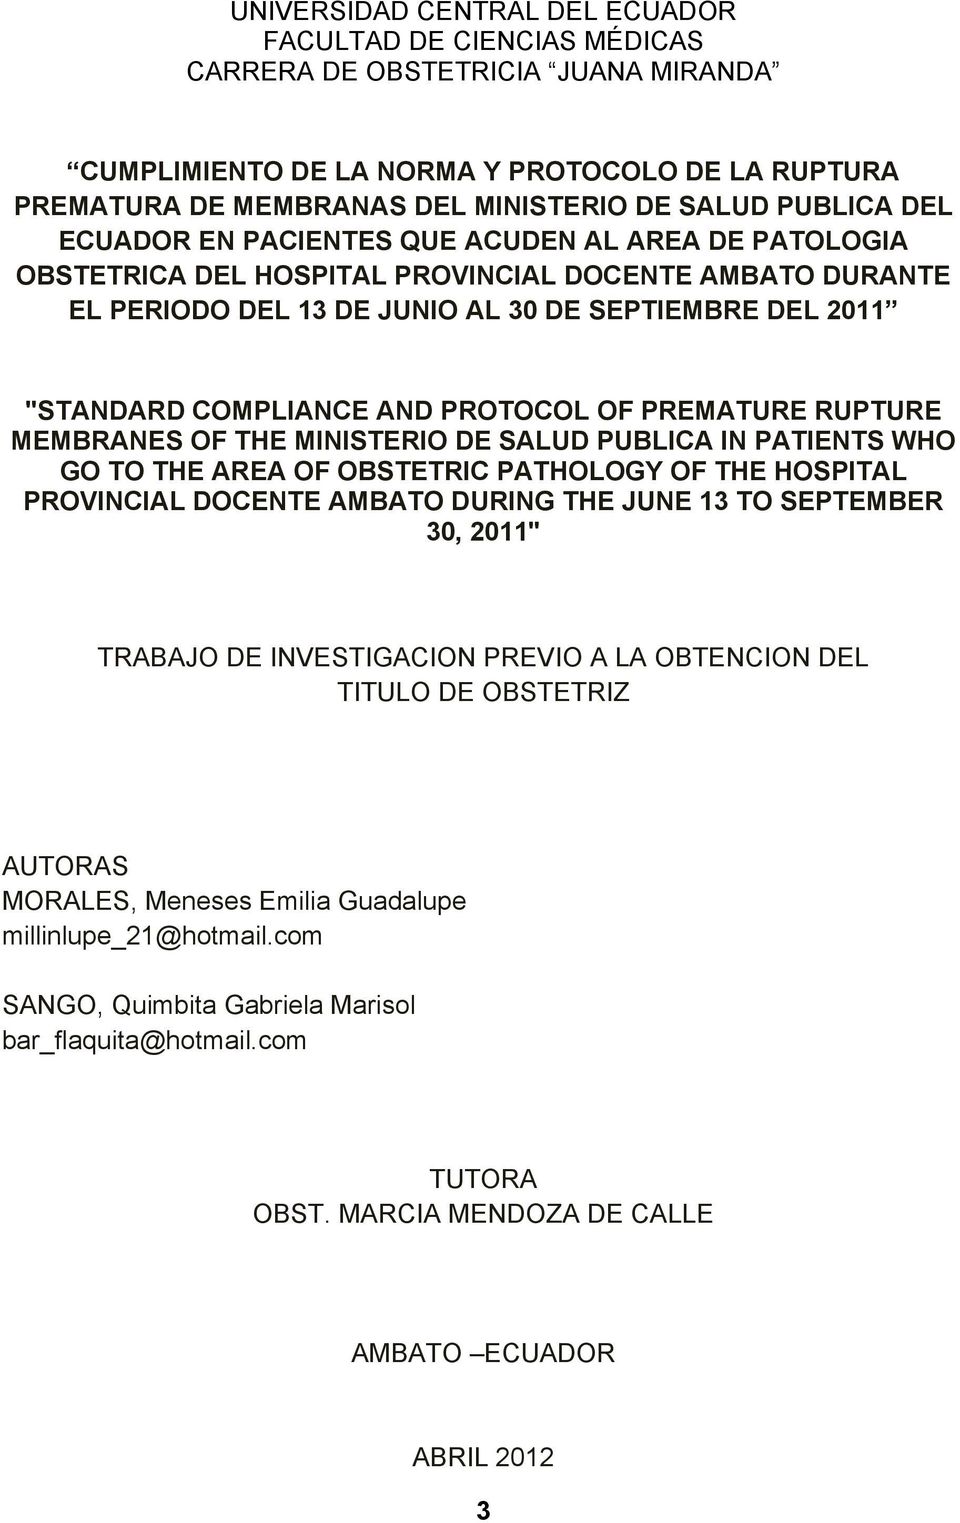 AND PROTOCOL OF PREMATURE RUPTURE MEMBRANES OF THE MINISTERIO DE SALUD PUBLICA IN PATIENTS WHO GO TO THE AREA OF OBSTETRIC PATHOLOGY OF THE HOSPITAL PROVINCIAL DOCENTE AMBATO DURING THE JUNE 13 TO